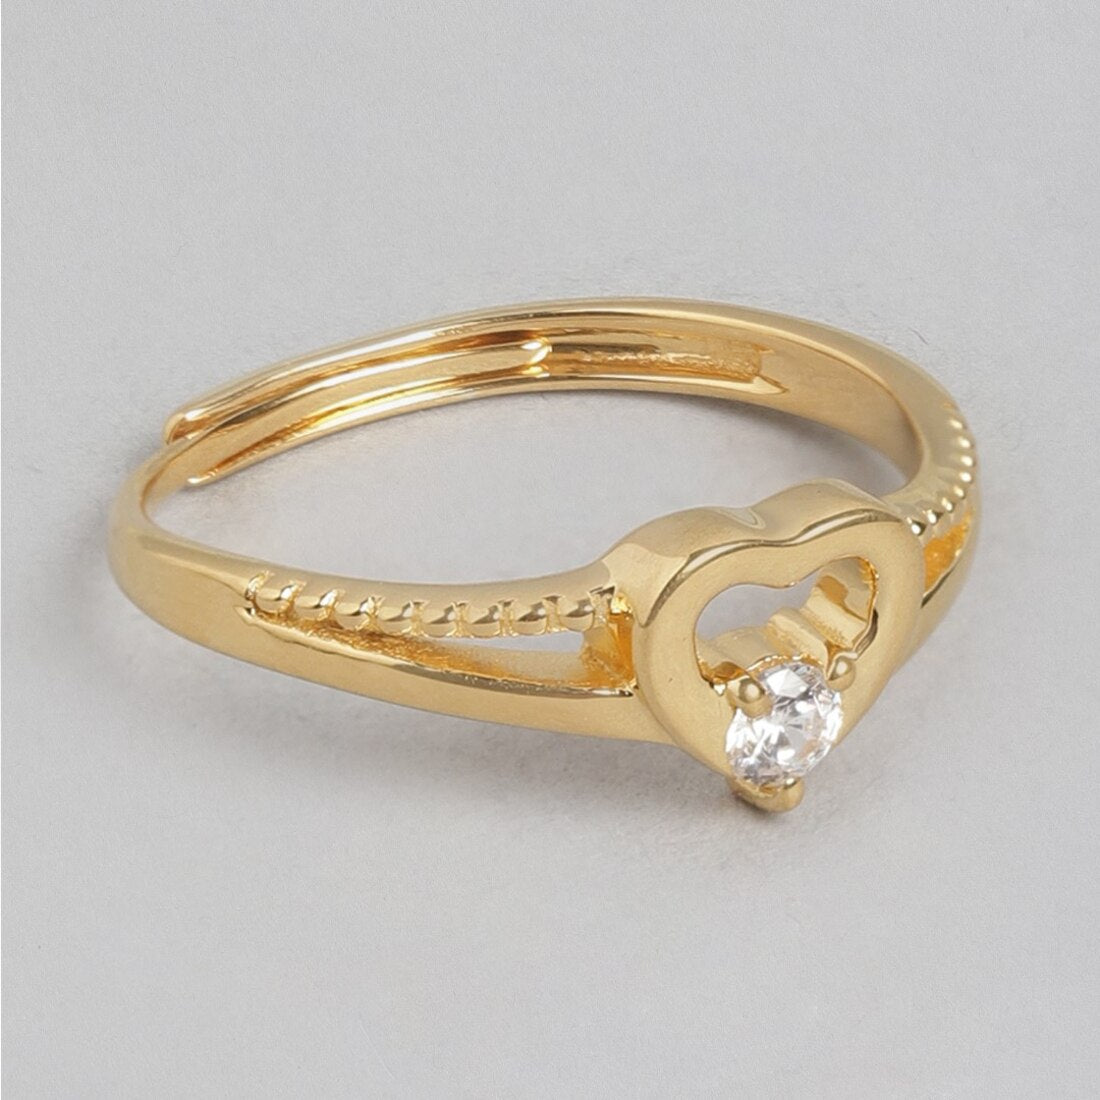 Heartfelt Love Adjustable Gold-Plated 925 Sterling Silver Ring with Cubic Zirconia (Adjustable)